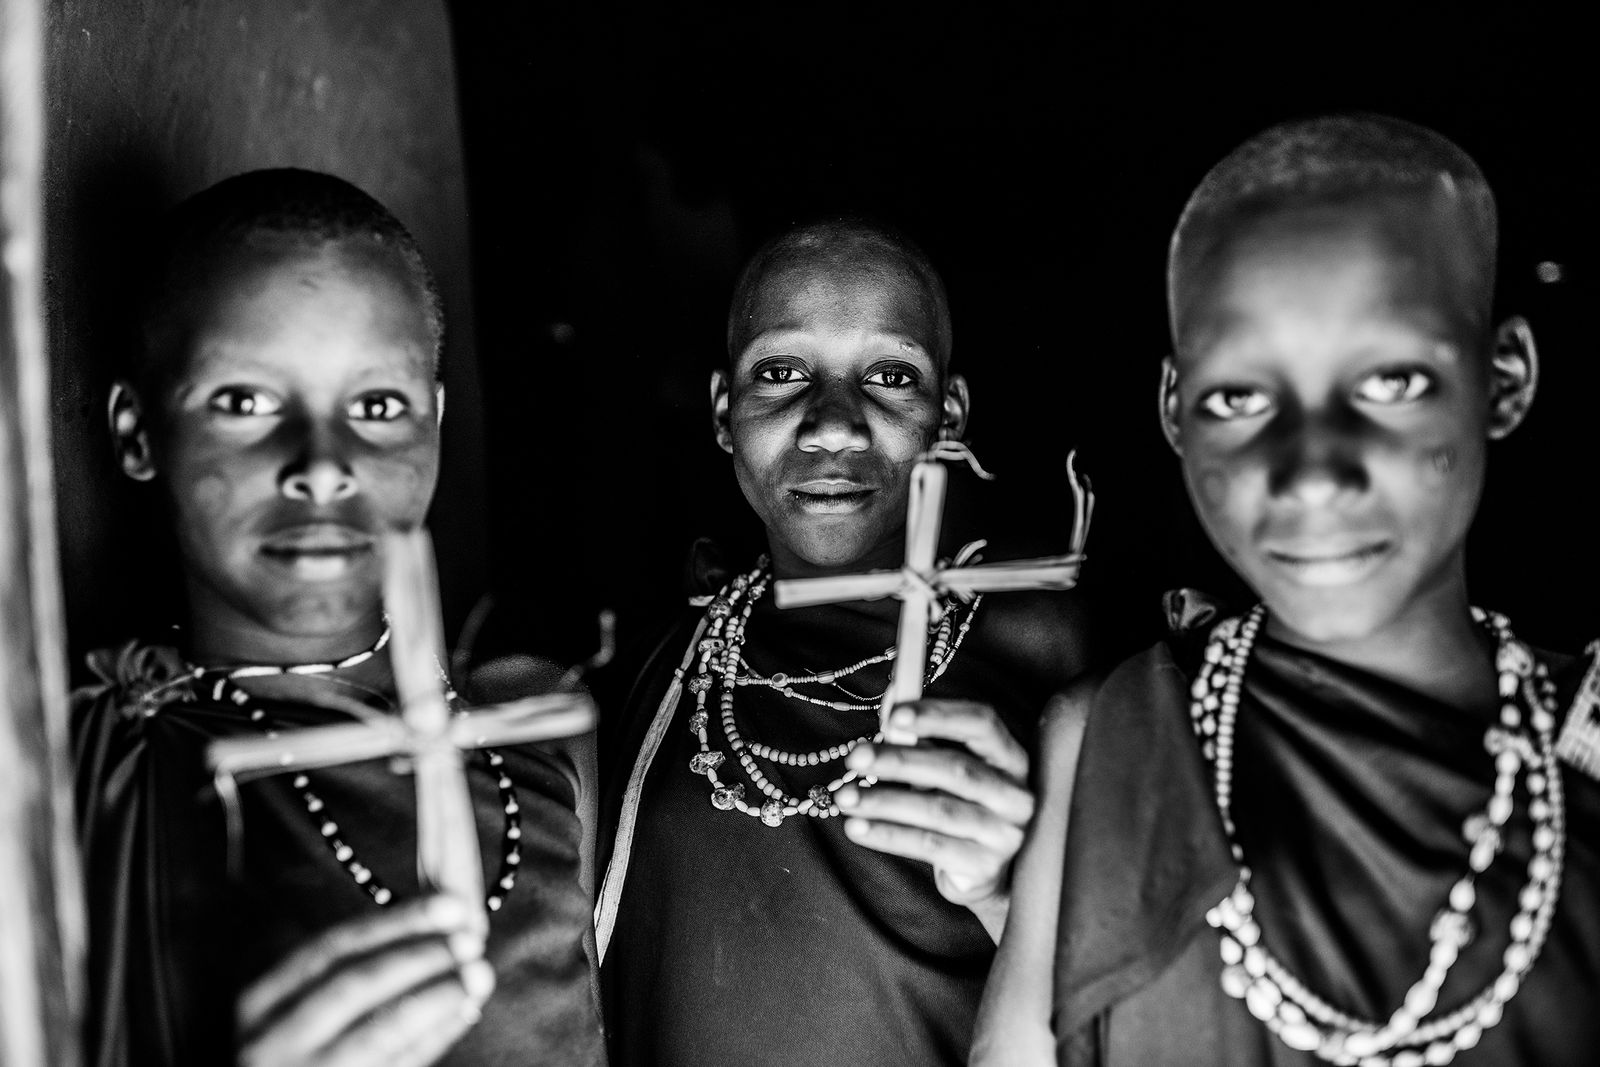 © Carla Kogelman - Image from the we live in Masai photography project